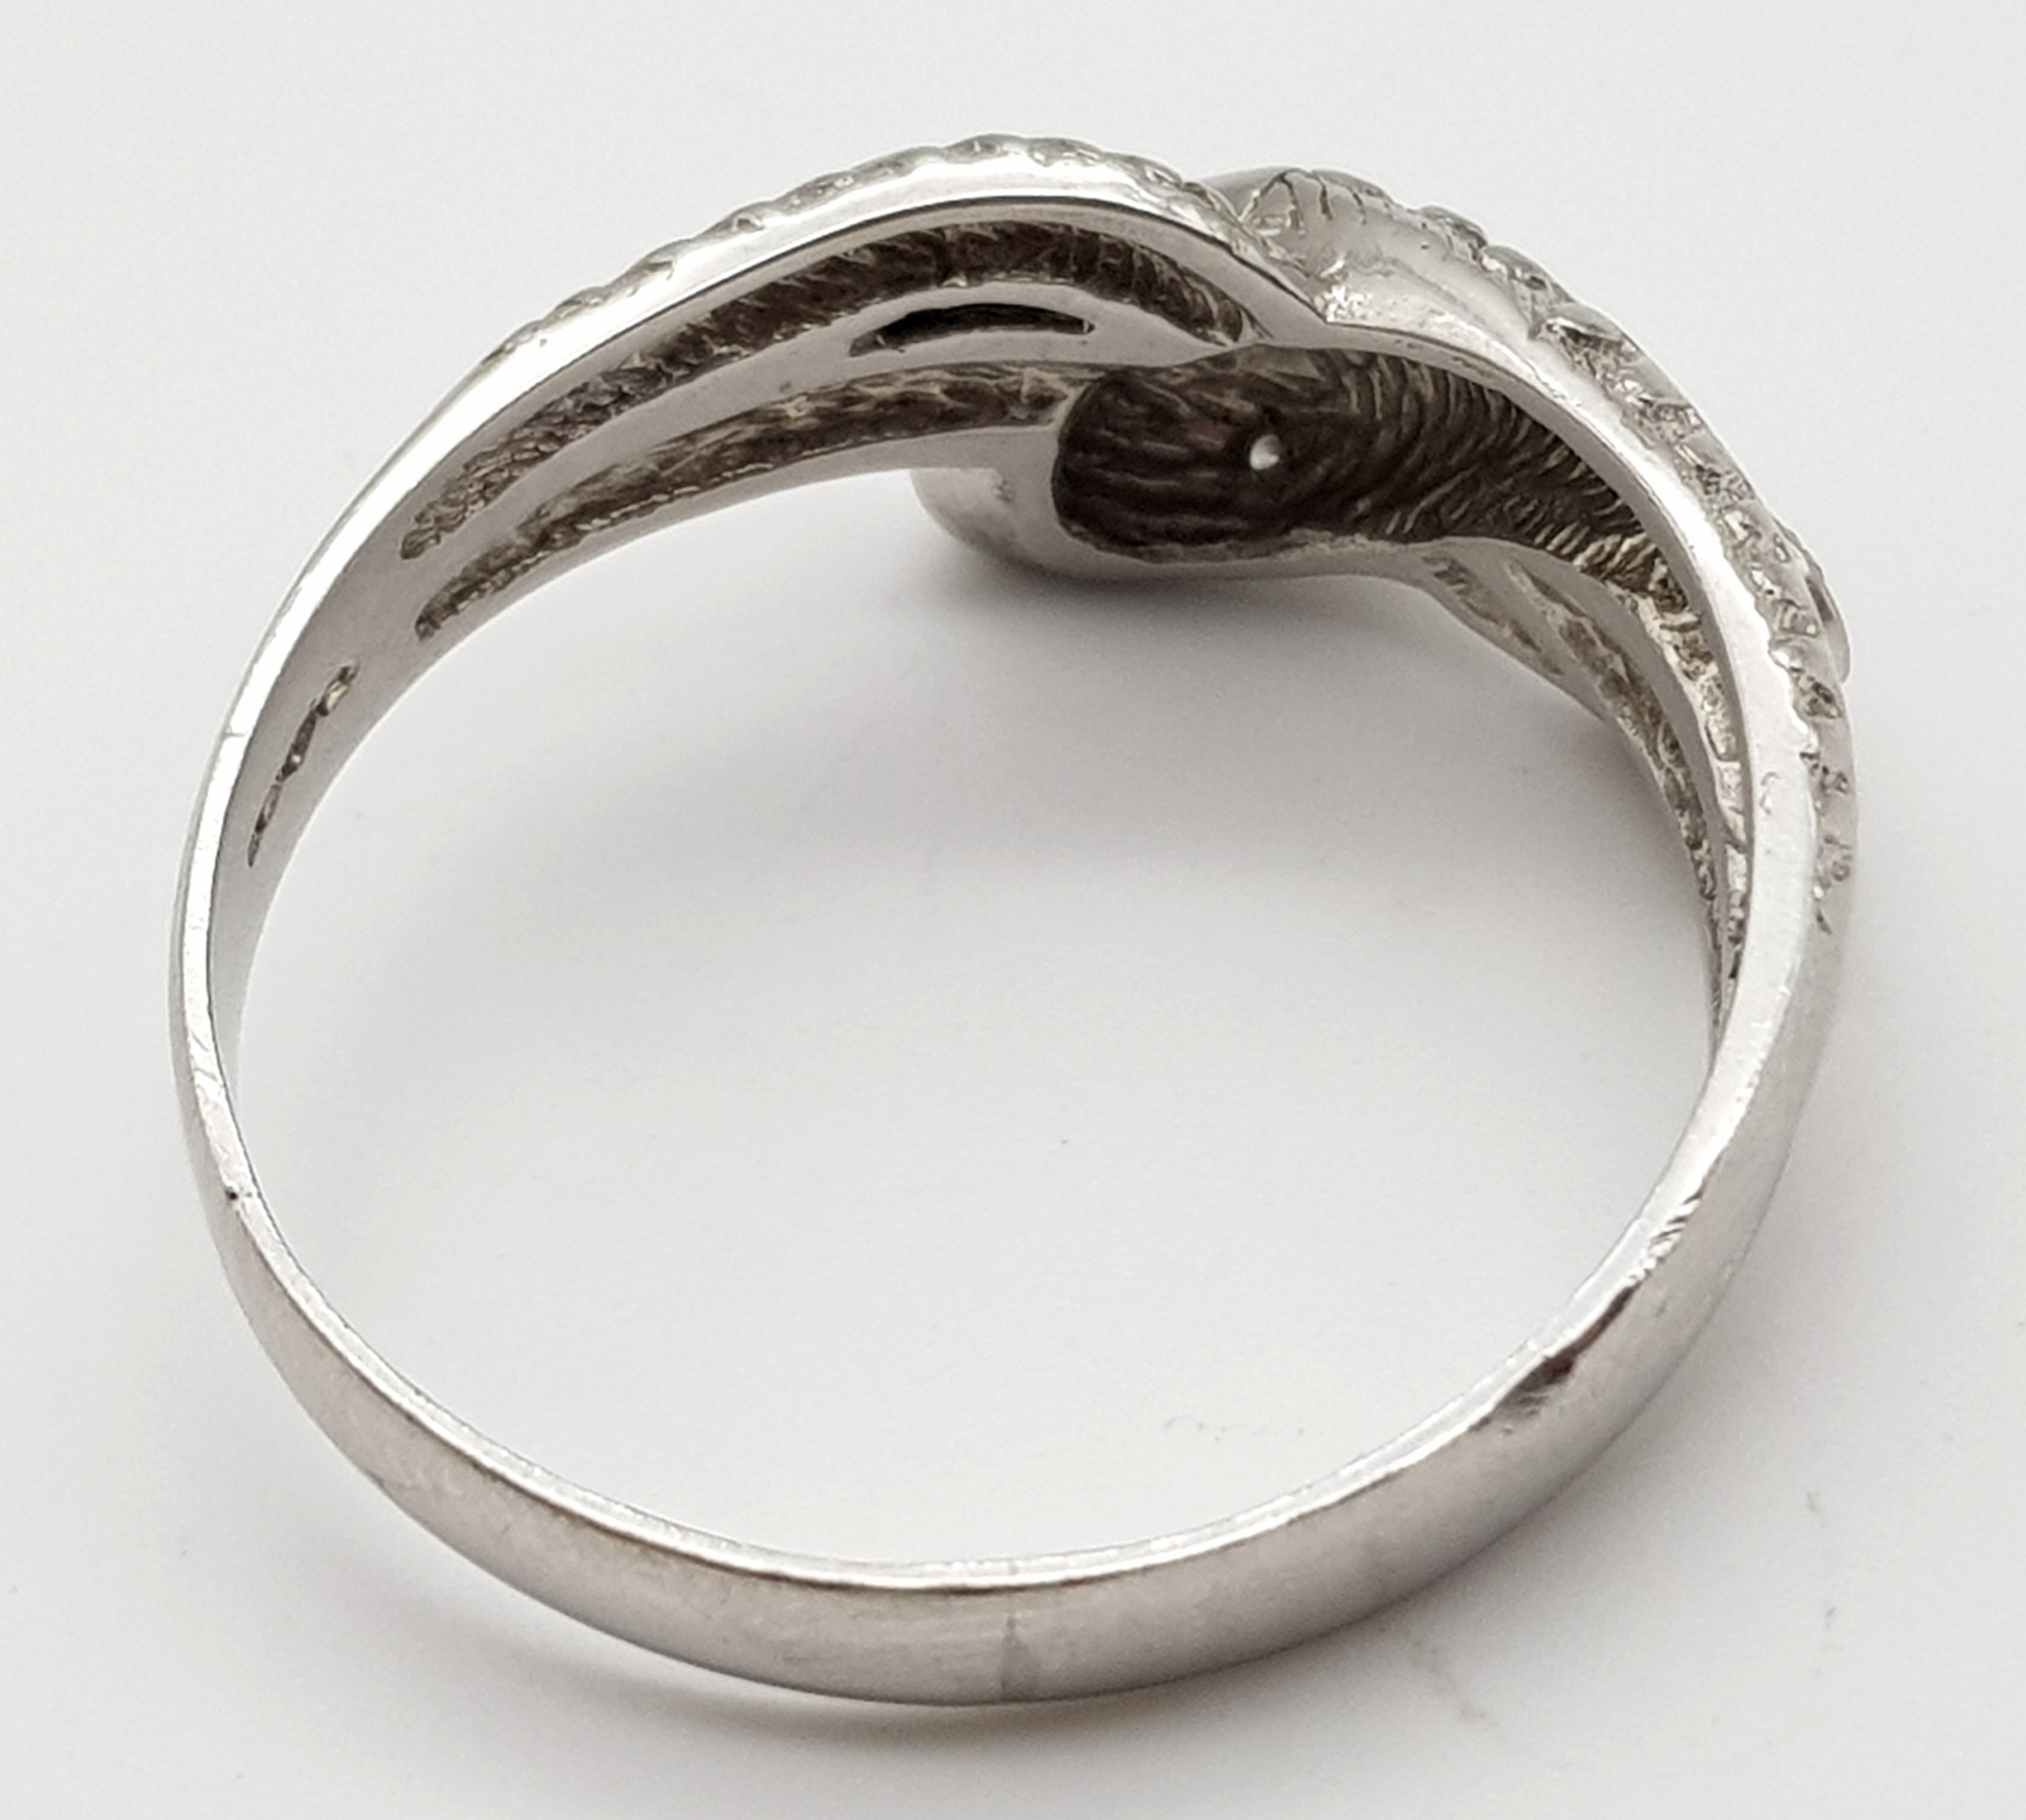 A Very Large 950 Platinum and Diamond Snake Ring. A coiling serpent with diamond eyes and body. Size - Image 4 of 5